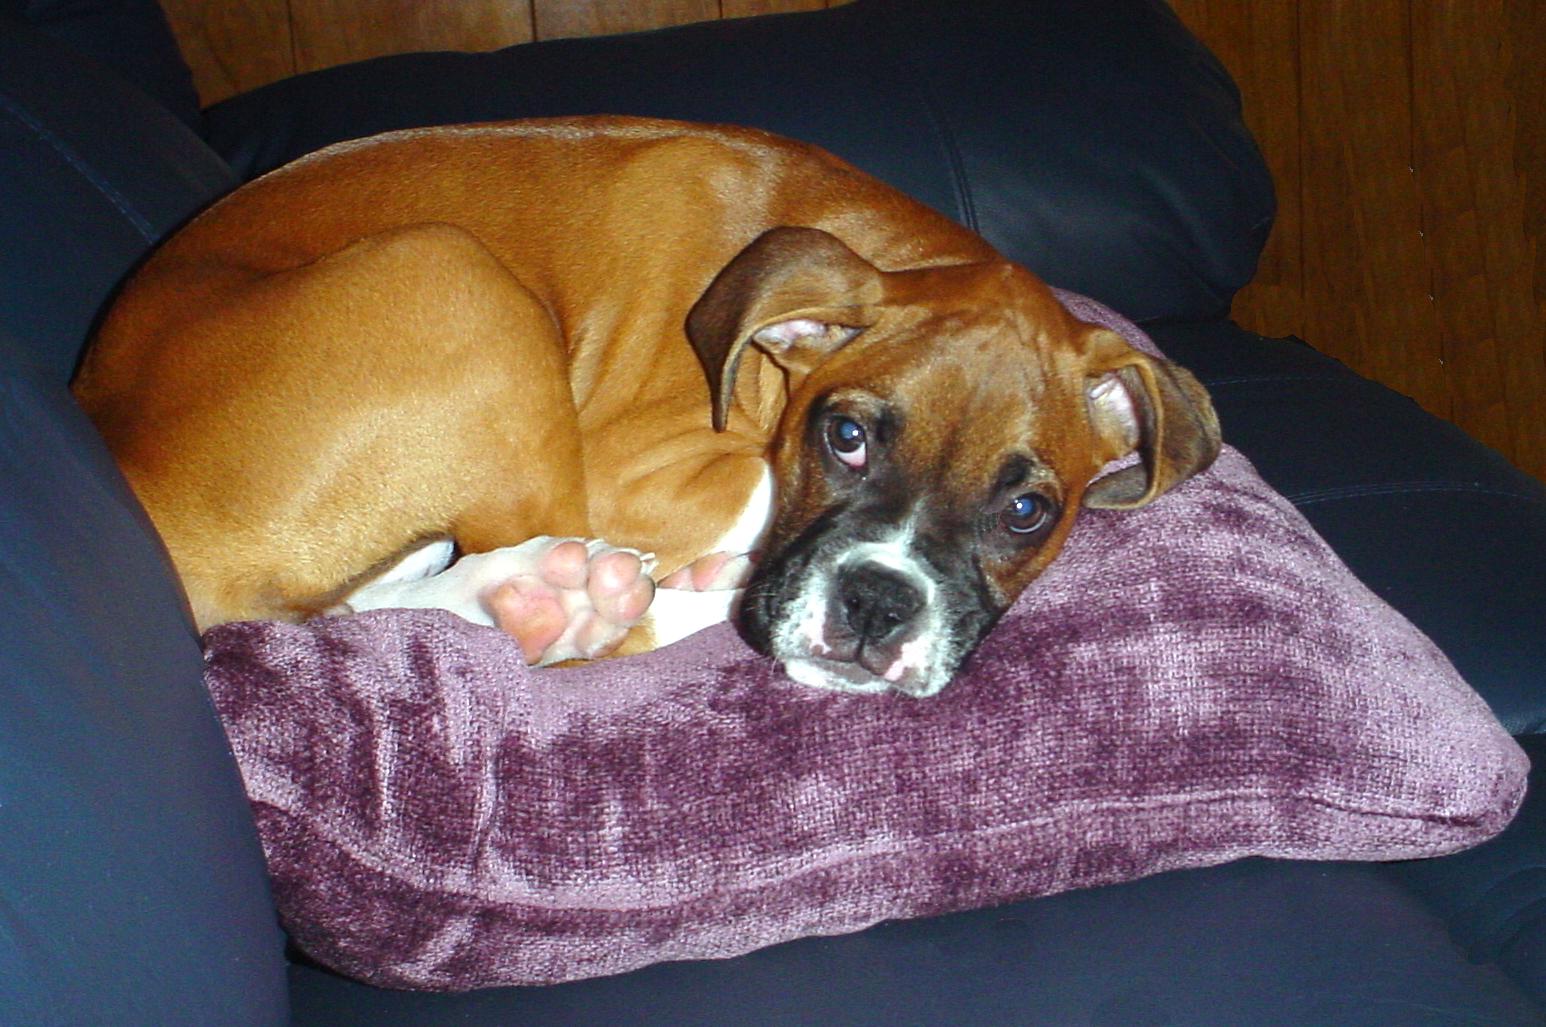 Boxer Dog curled up in the pillow on the couch